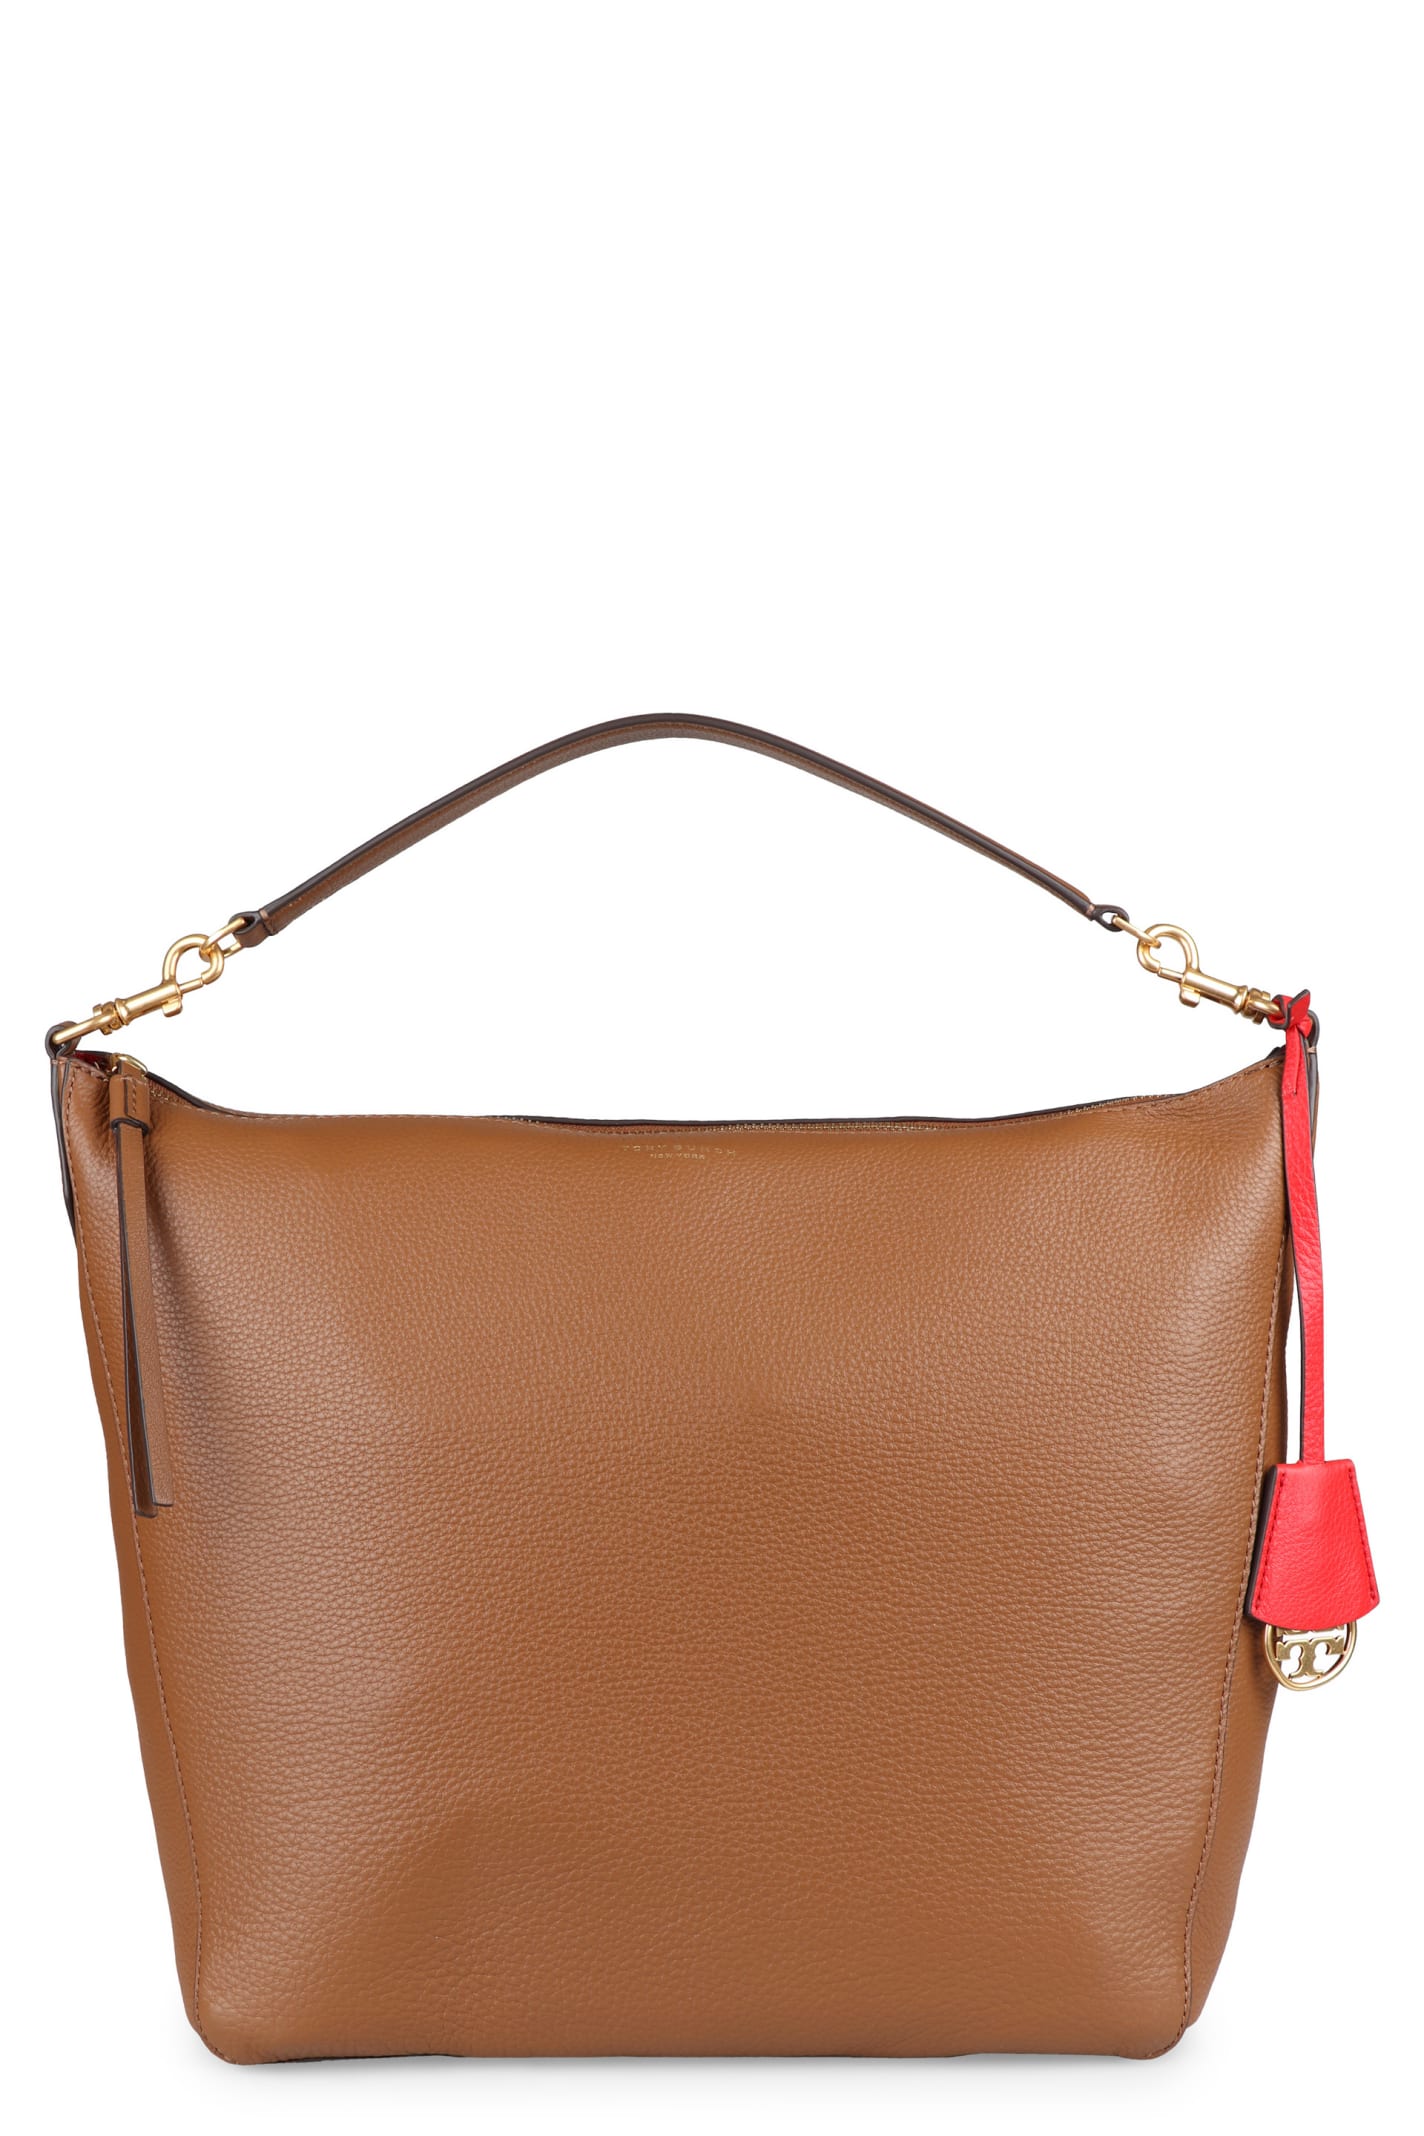 Tory Burch Perry Leather Hobo-bag